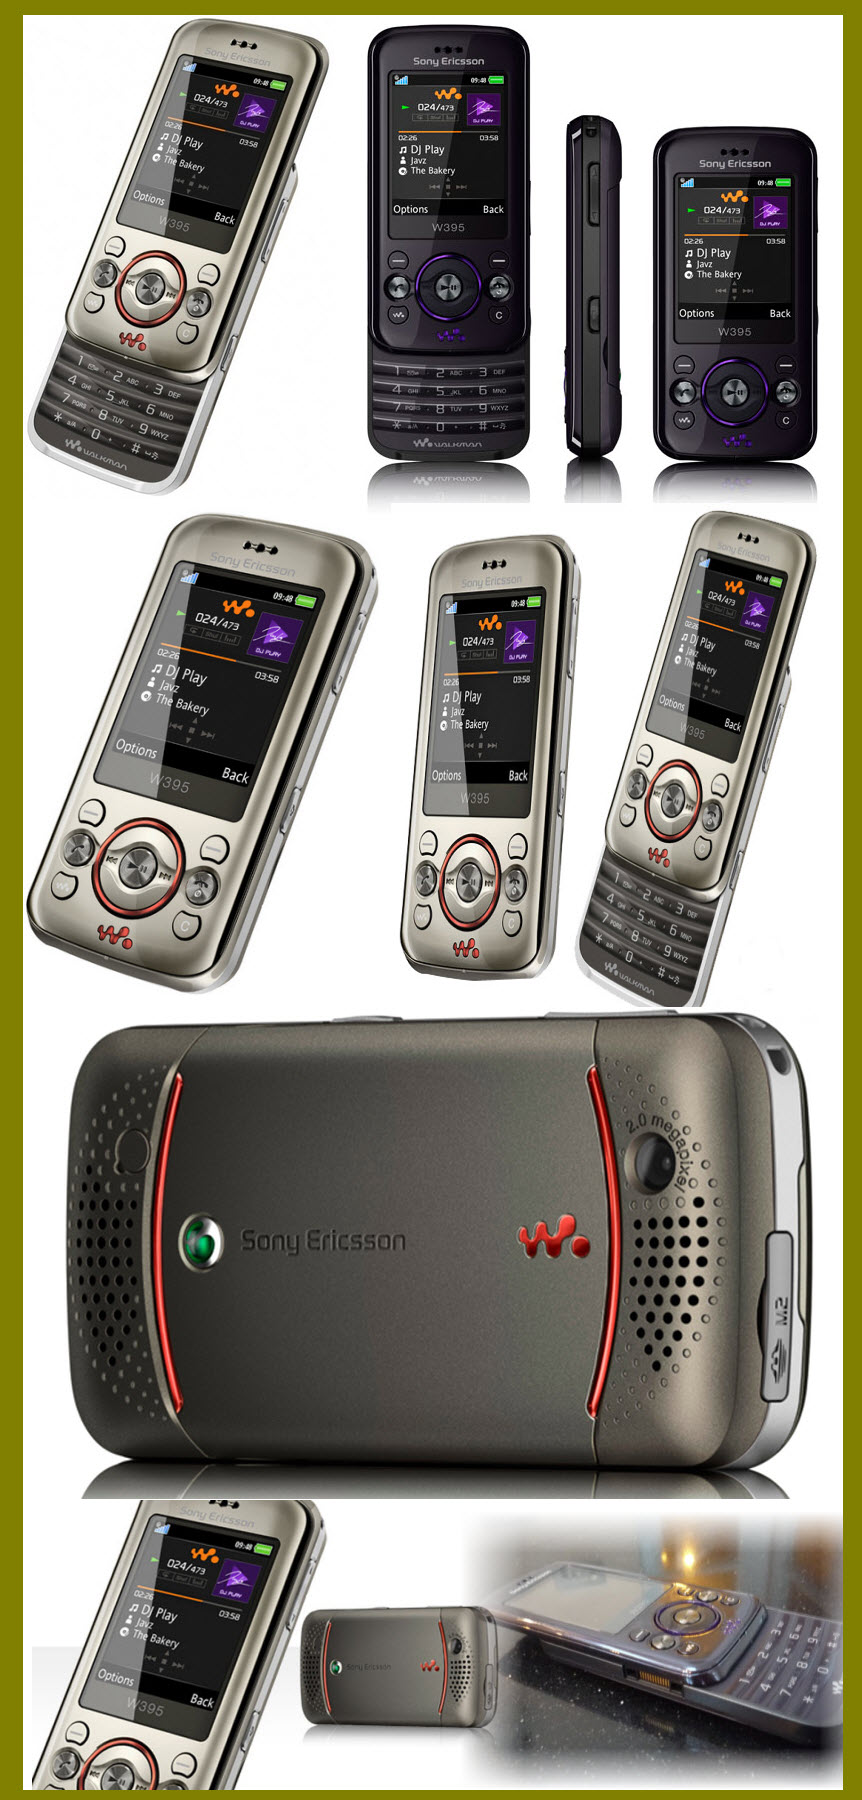 sony ericsson liveview mn800 manual